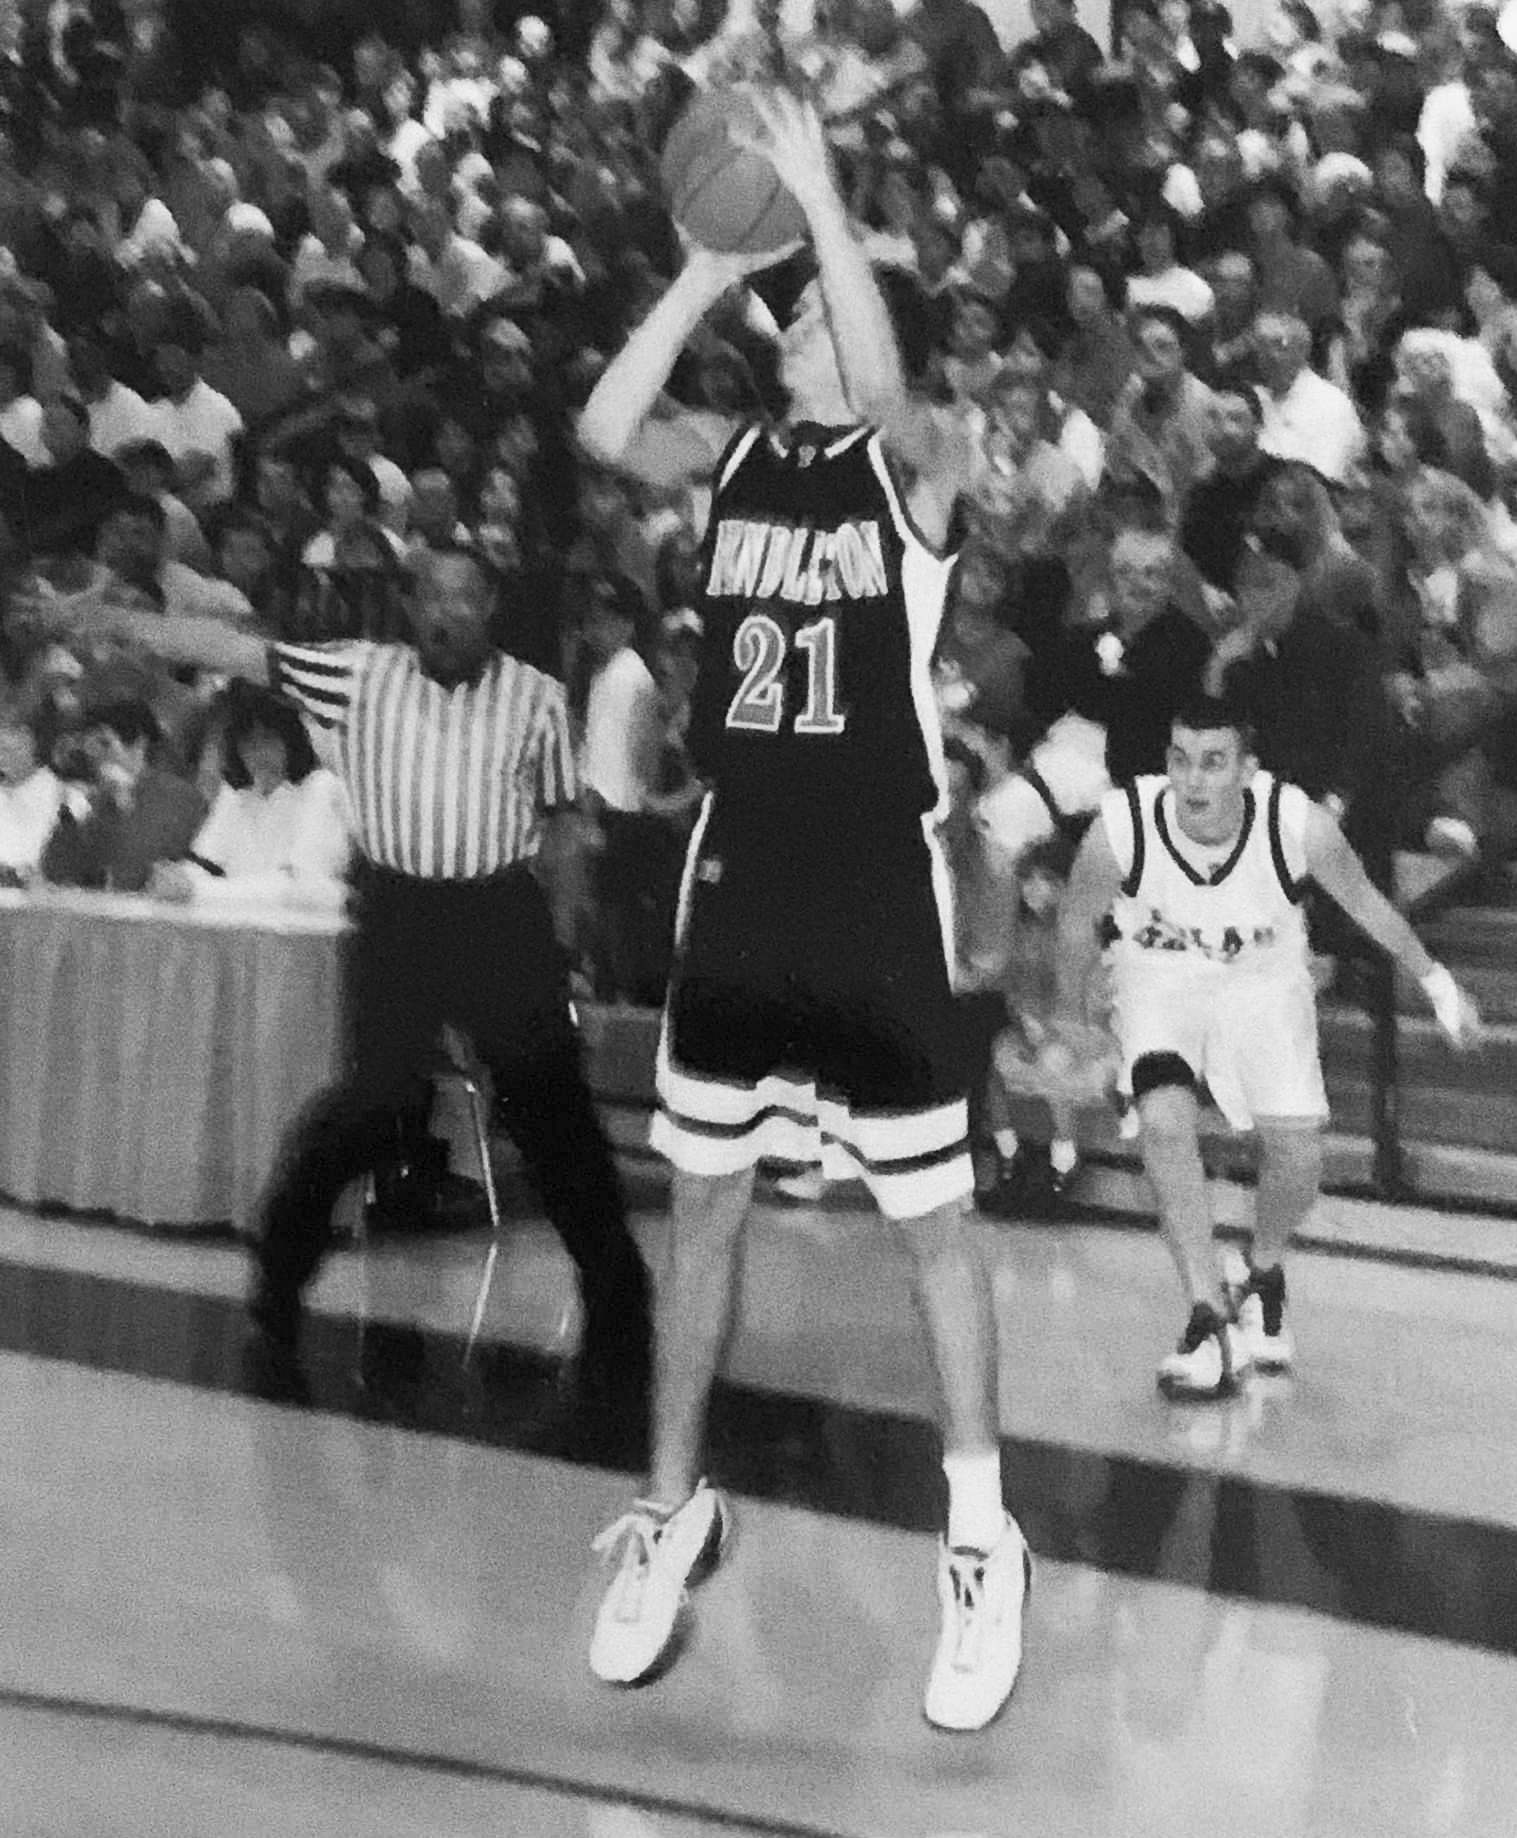 2005 PCHS graduate Mason O'Hara enters the 2023 10th Region Hall of Fame class and will always be remembered as one of the greatest shooters in school history. Photo provided by Mason O'Hara